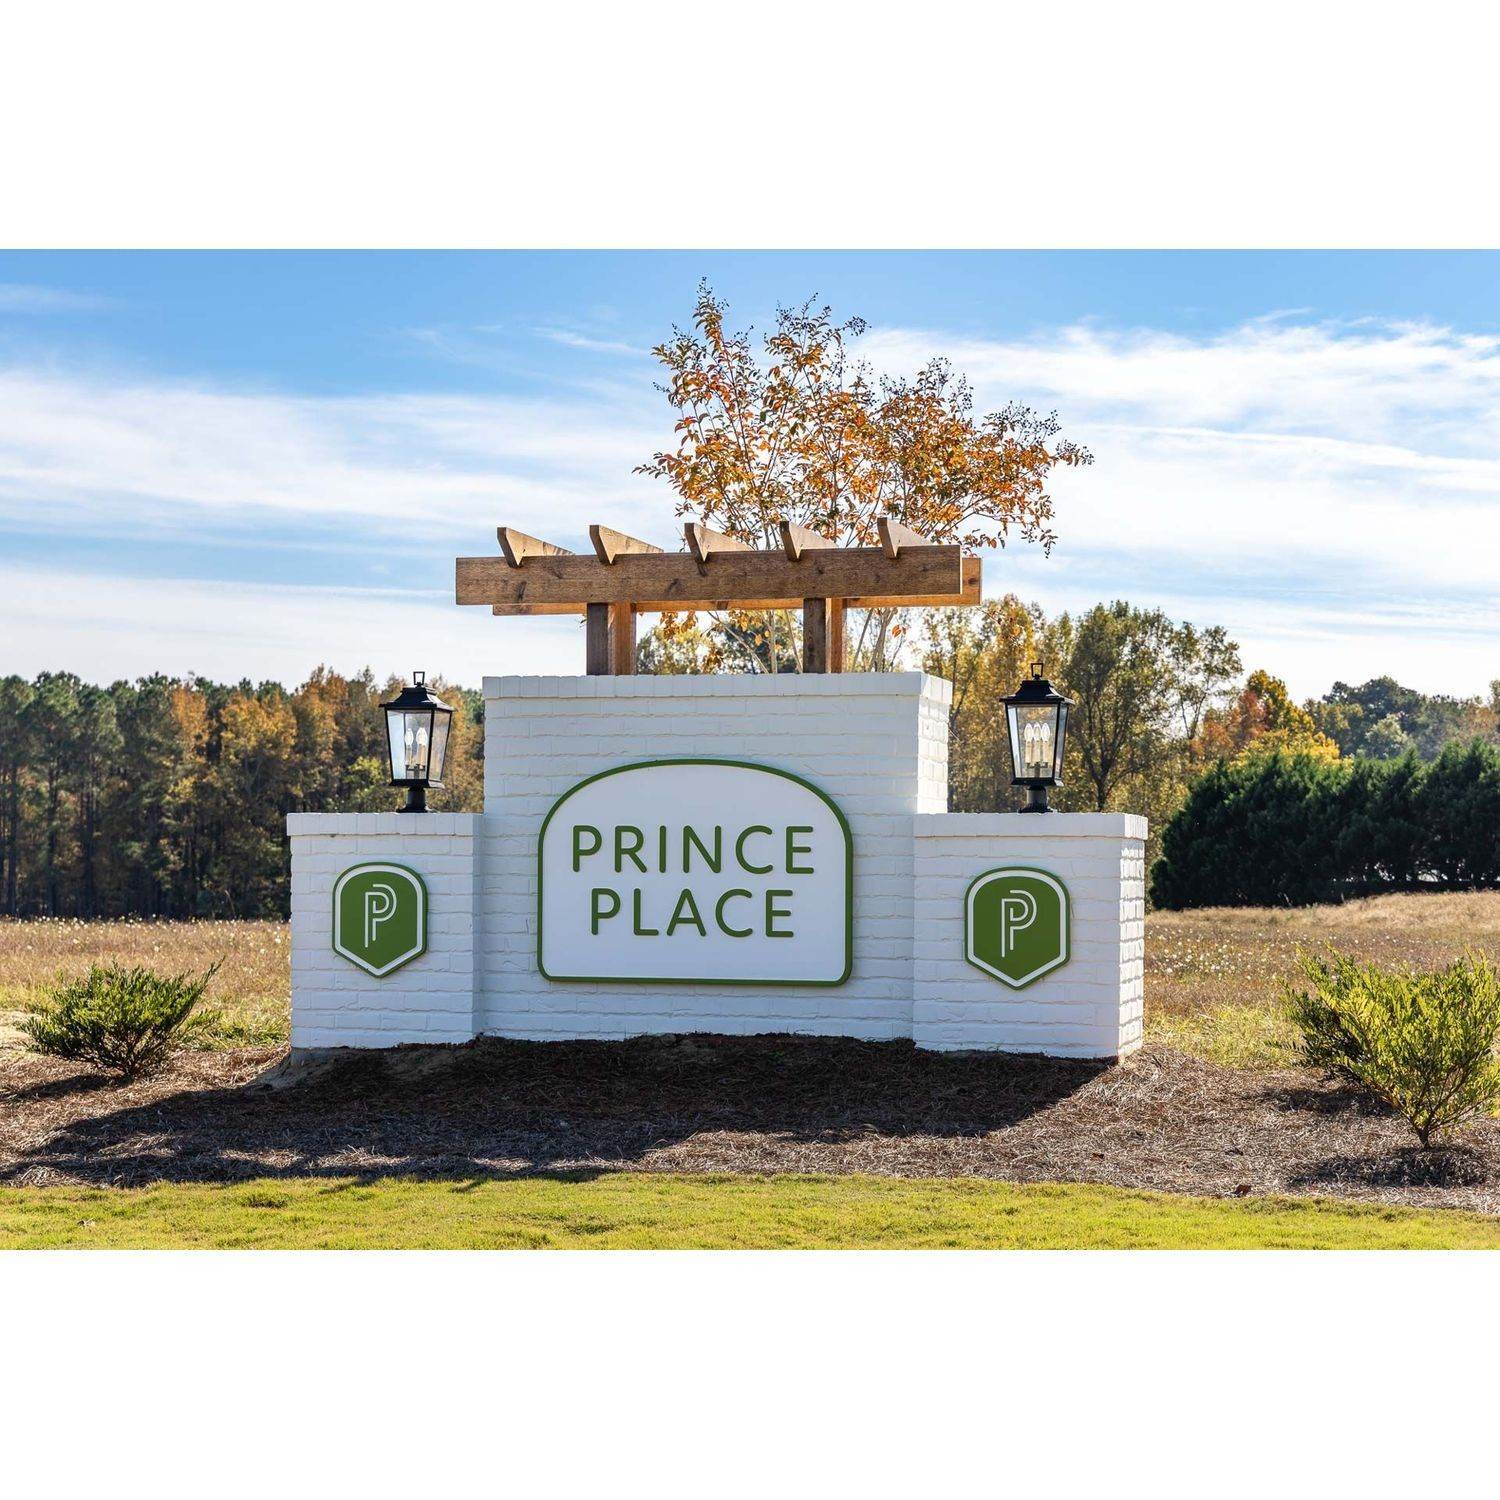 Prince Place building at Smith Prince Road, Angier, NC 27501